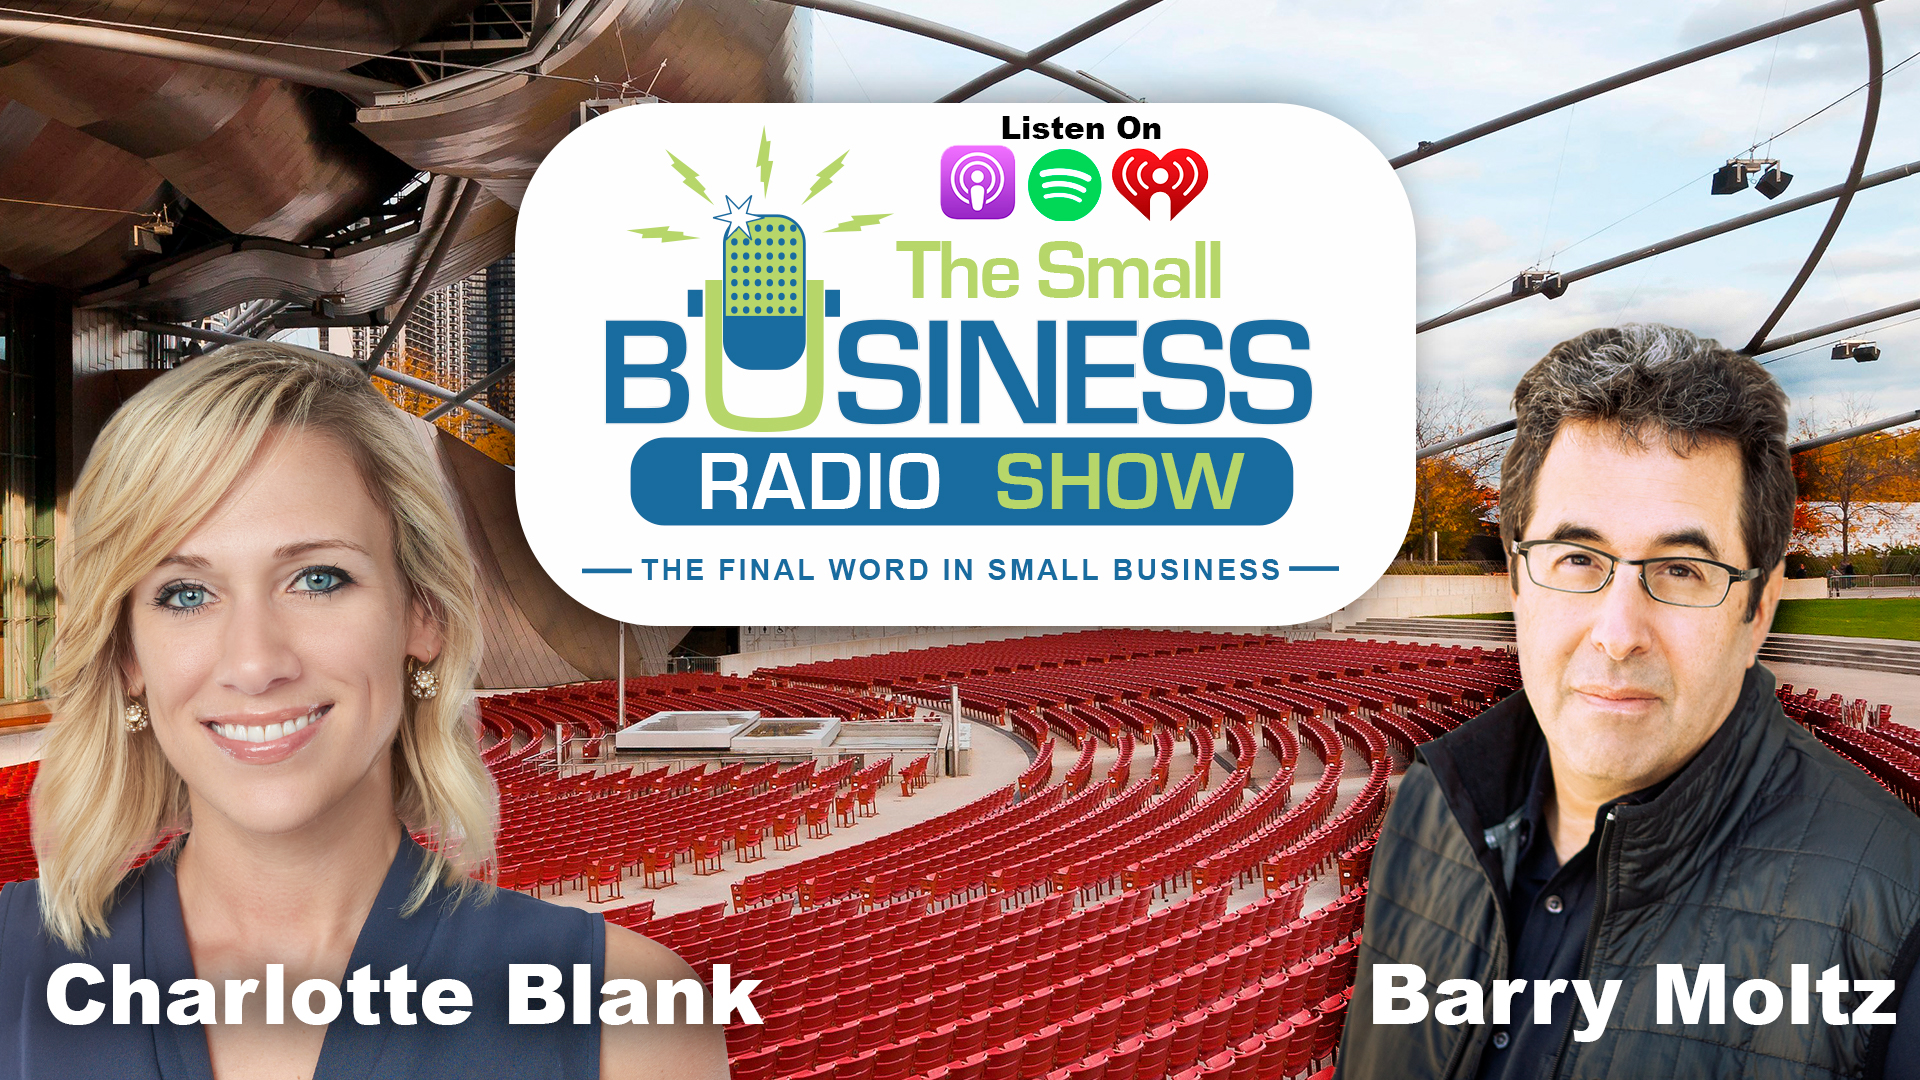 Charlotte Blank on The Small Business Radio Show